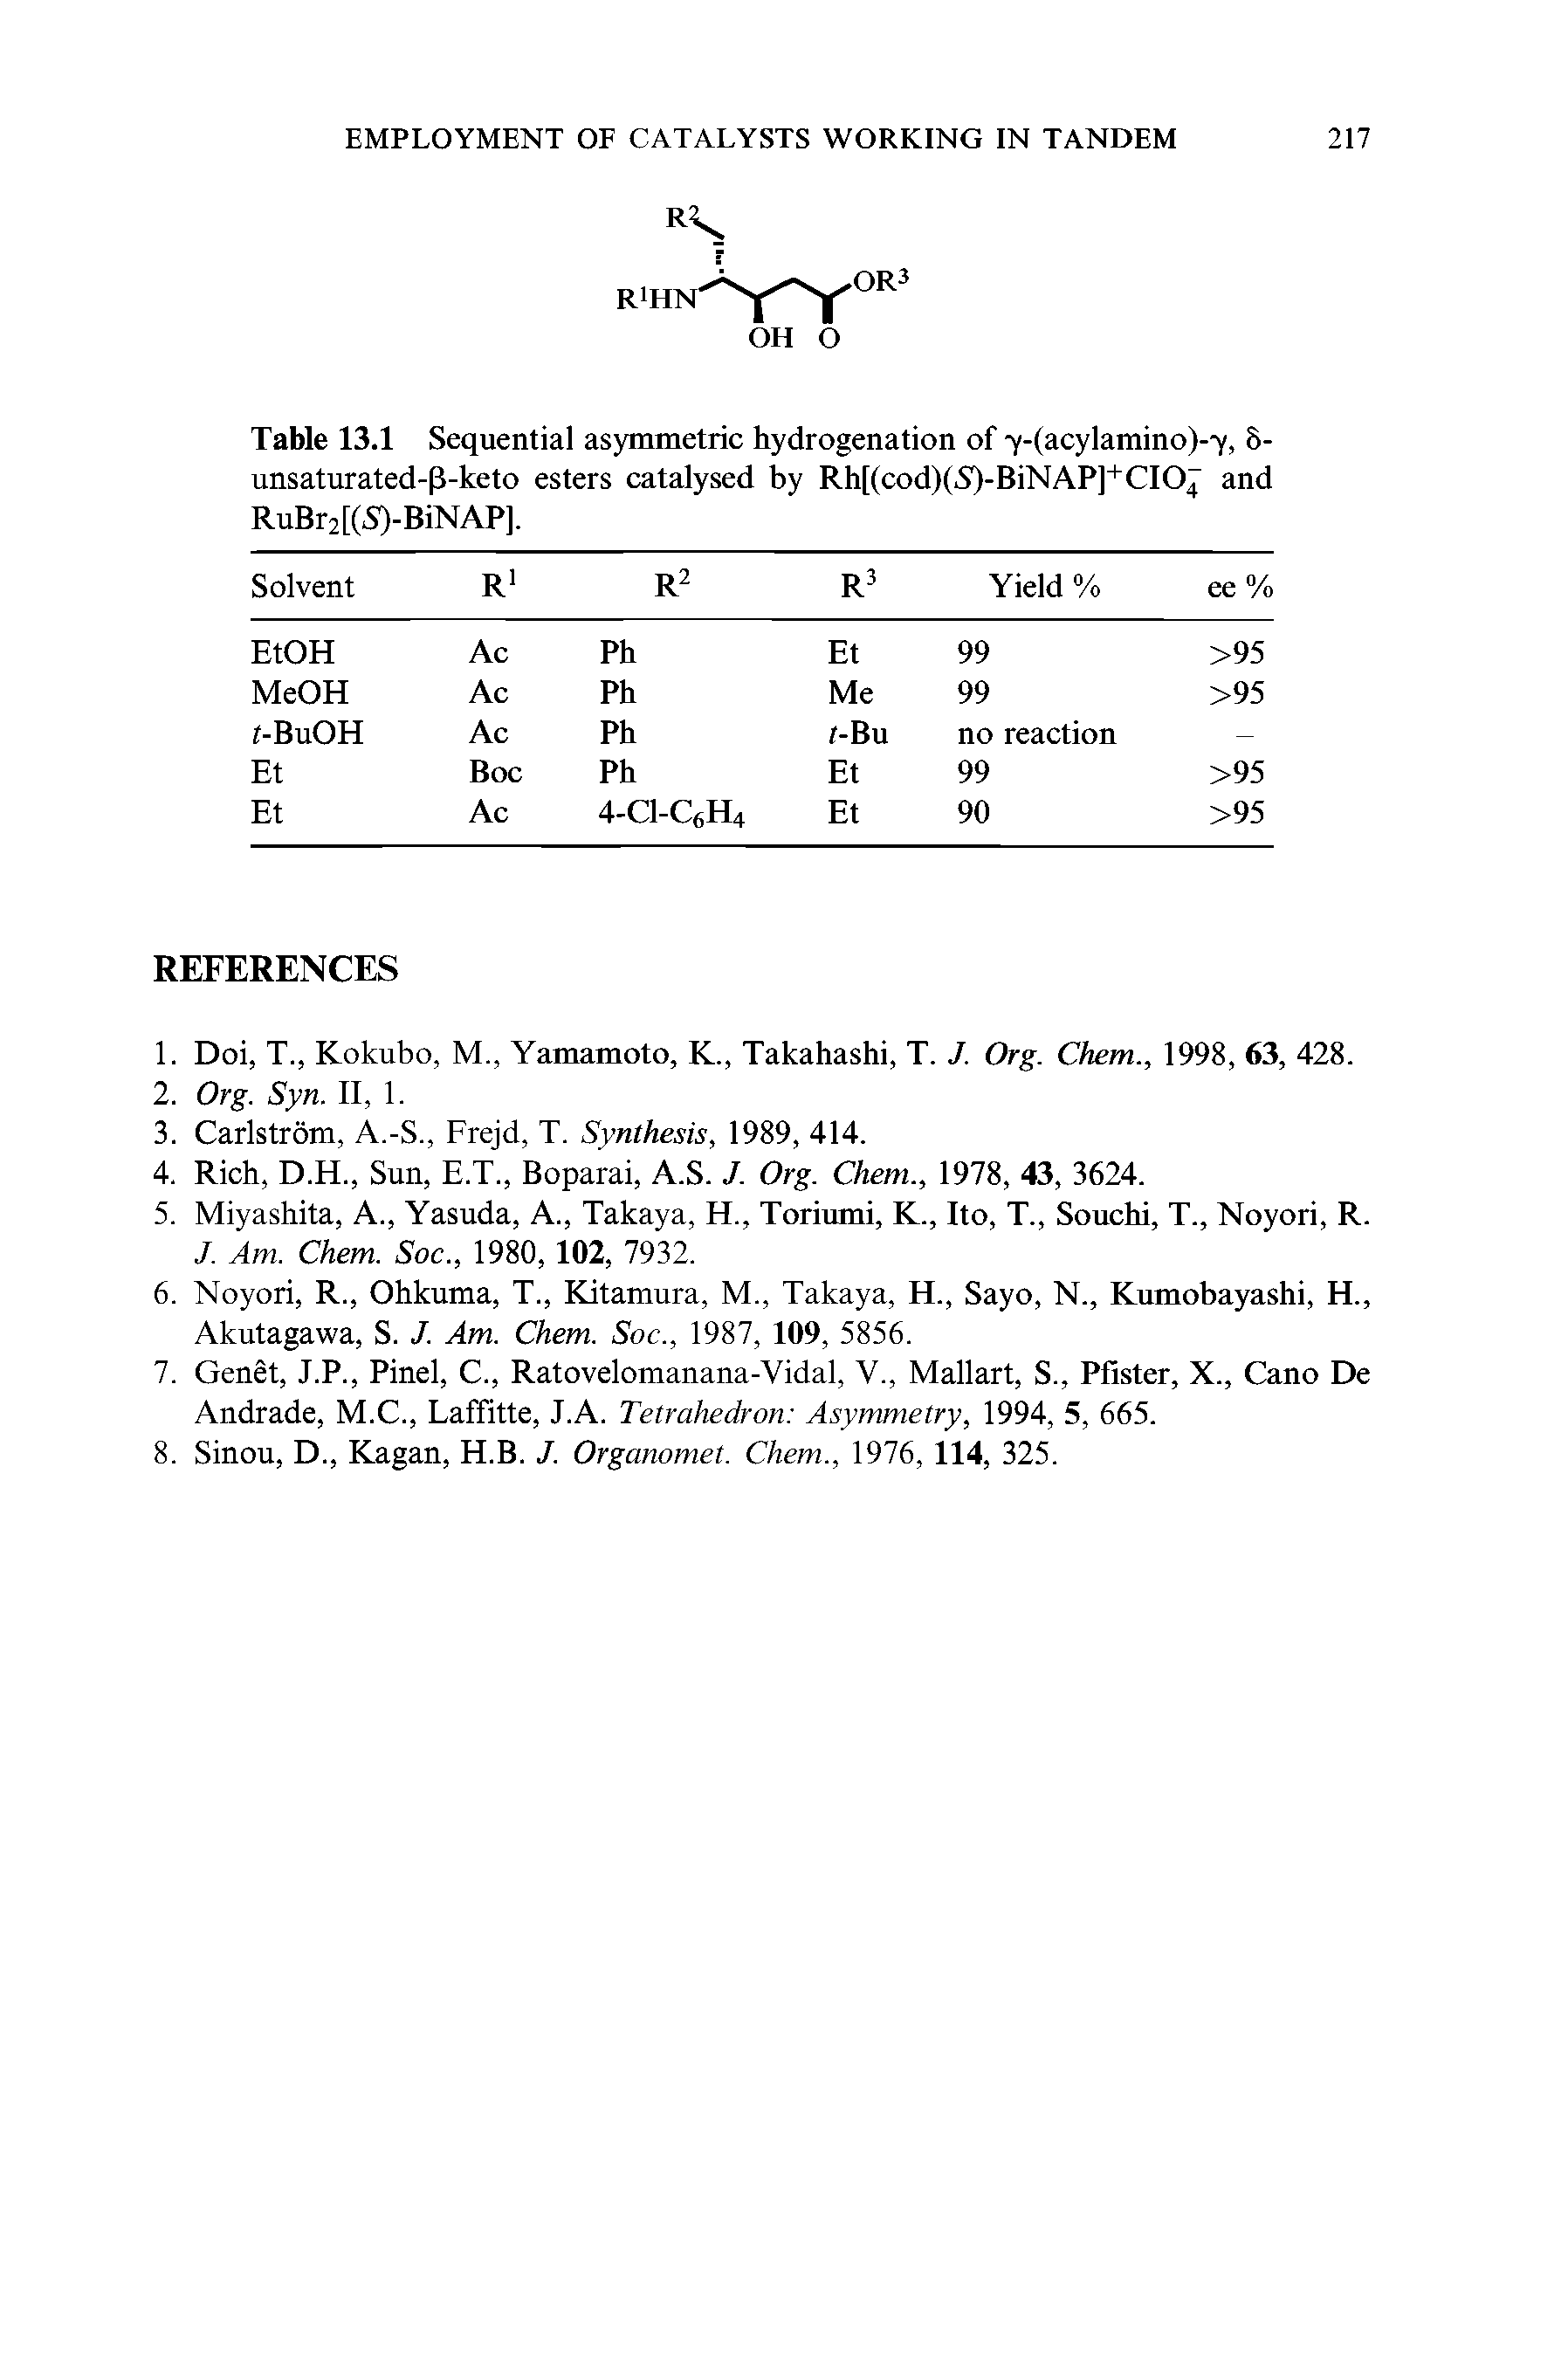 Table 13.1 Sequential asymmetric hydrogenation of -y-(acylamino)--y, 8-unsaturated-(l-keto esters catalysed by Rh[(cod)(S)-BiNAP]+CIC)4 and RuBr2[(S)-BiNAP],...